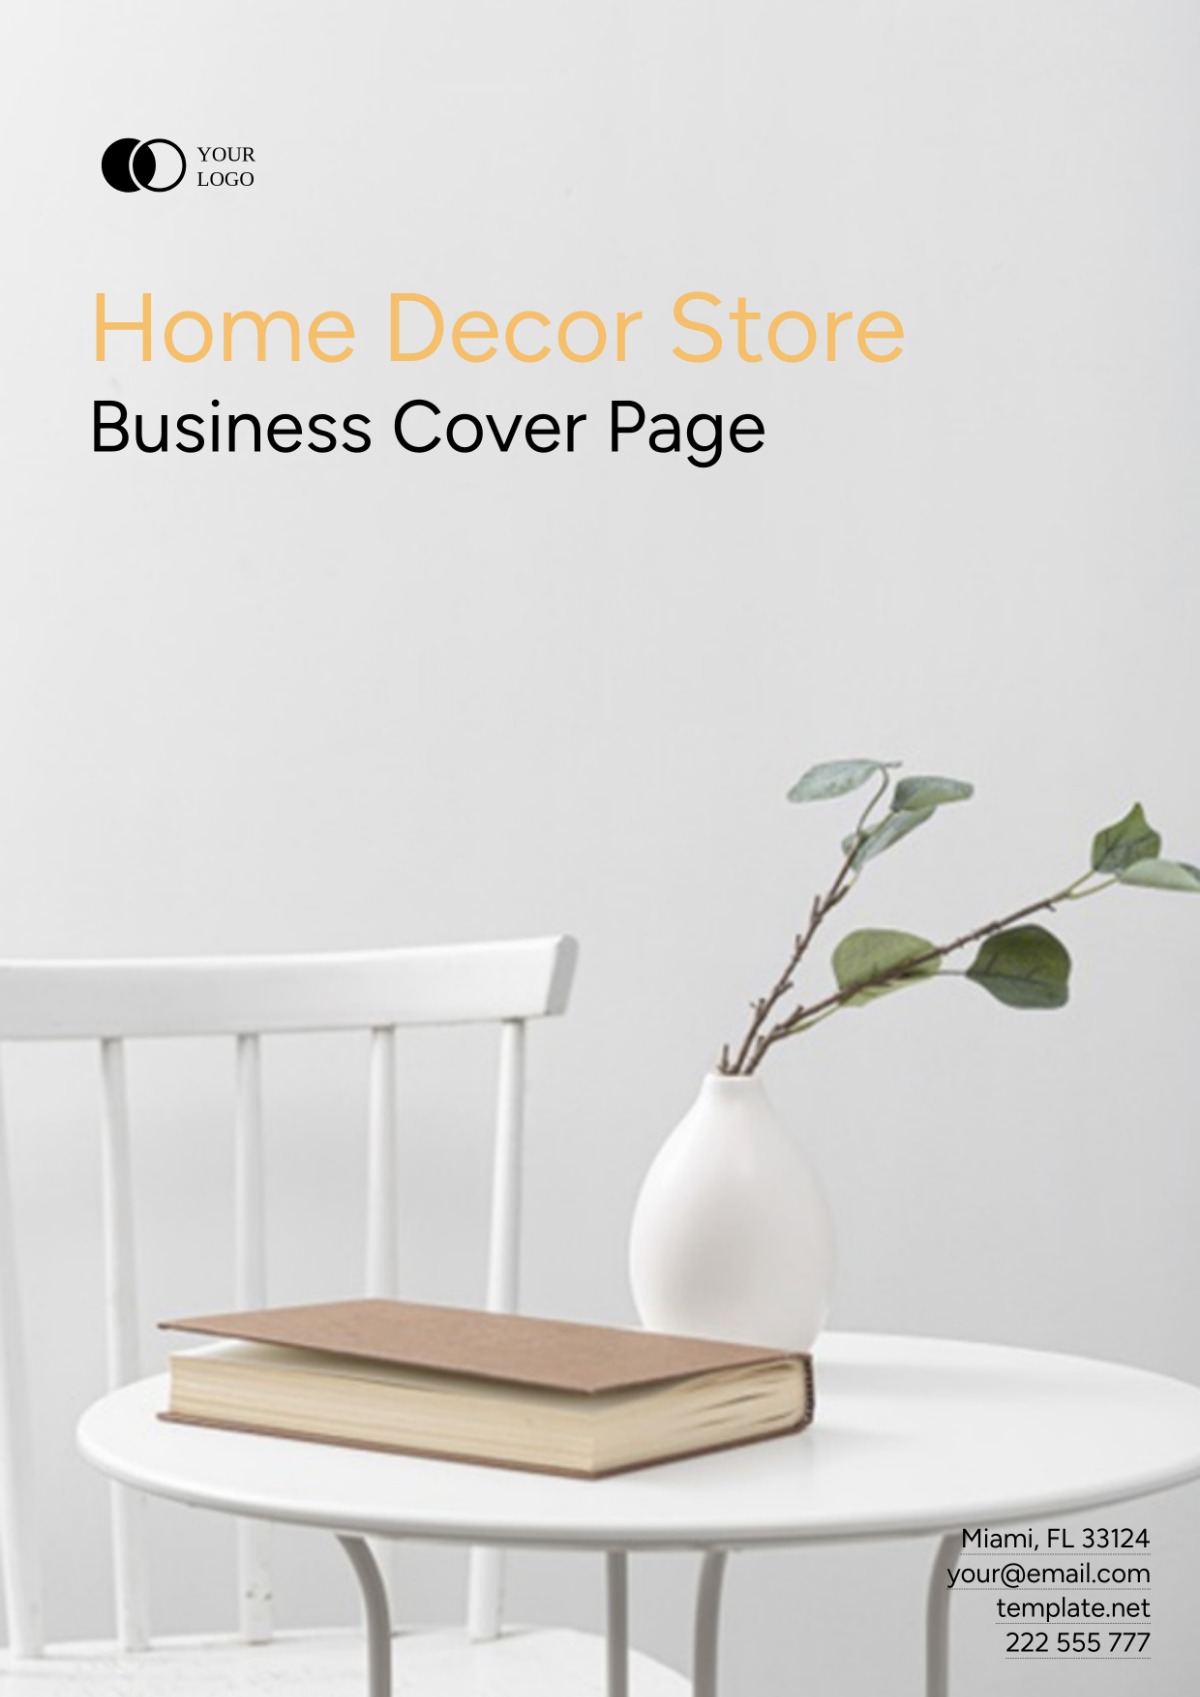 Home Decor Store Business Cover Page Template